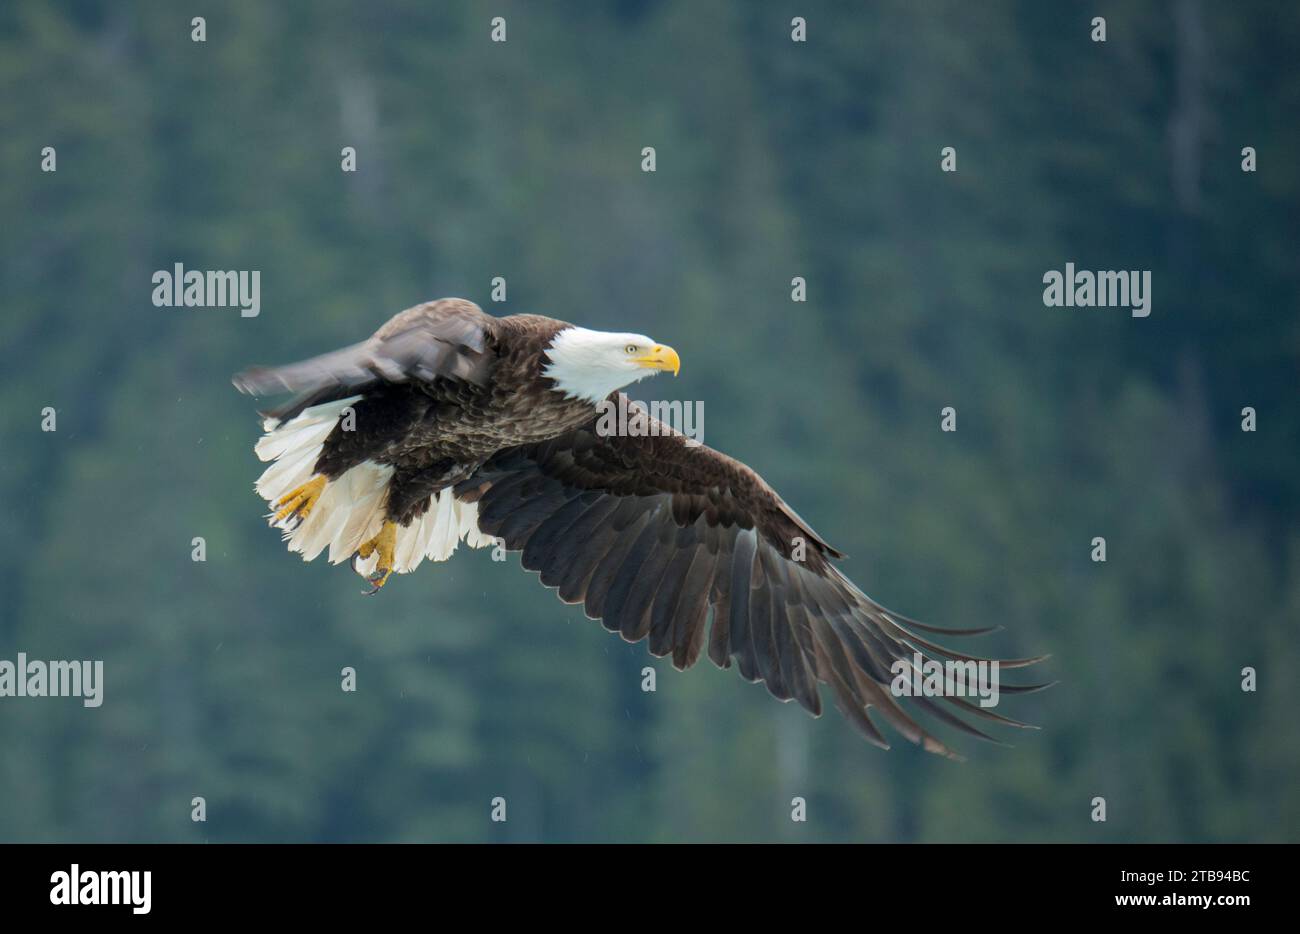 Bald eagle (Haliaeetus leucocephalus) in flight with a forest in the background, near Petersburg, Inside Passage, Alaska, USA Stock Photo